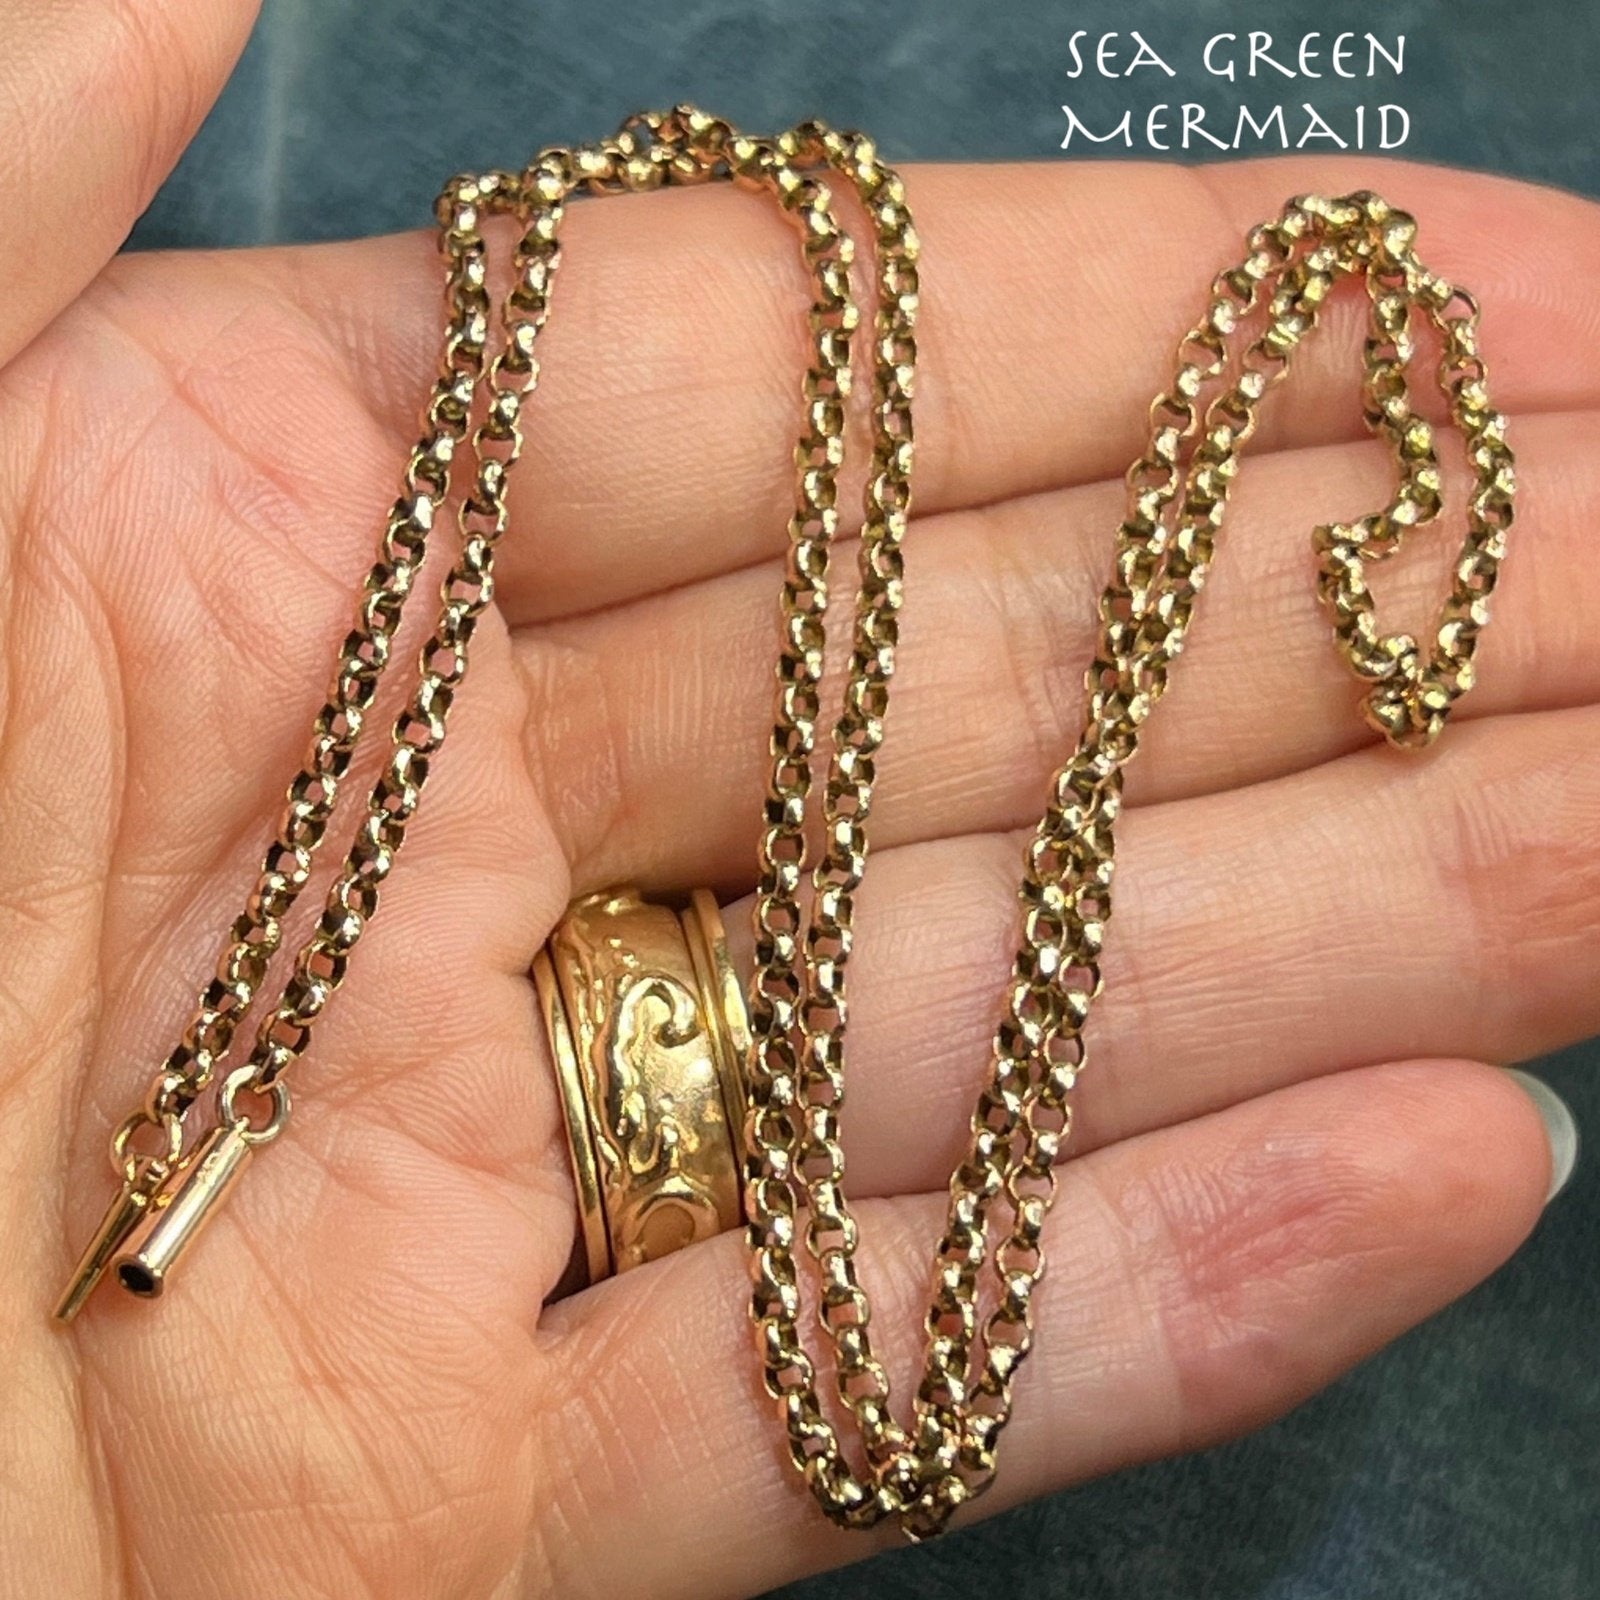 10k Rose Yellow Gold Rolo Chain Necklace. Antique 20 – Sea Green Mermaid